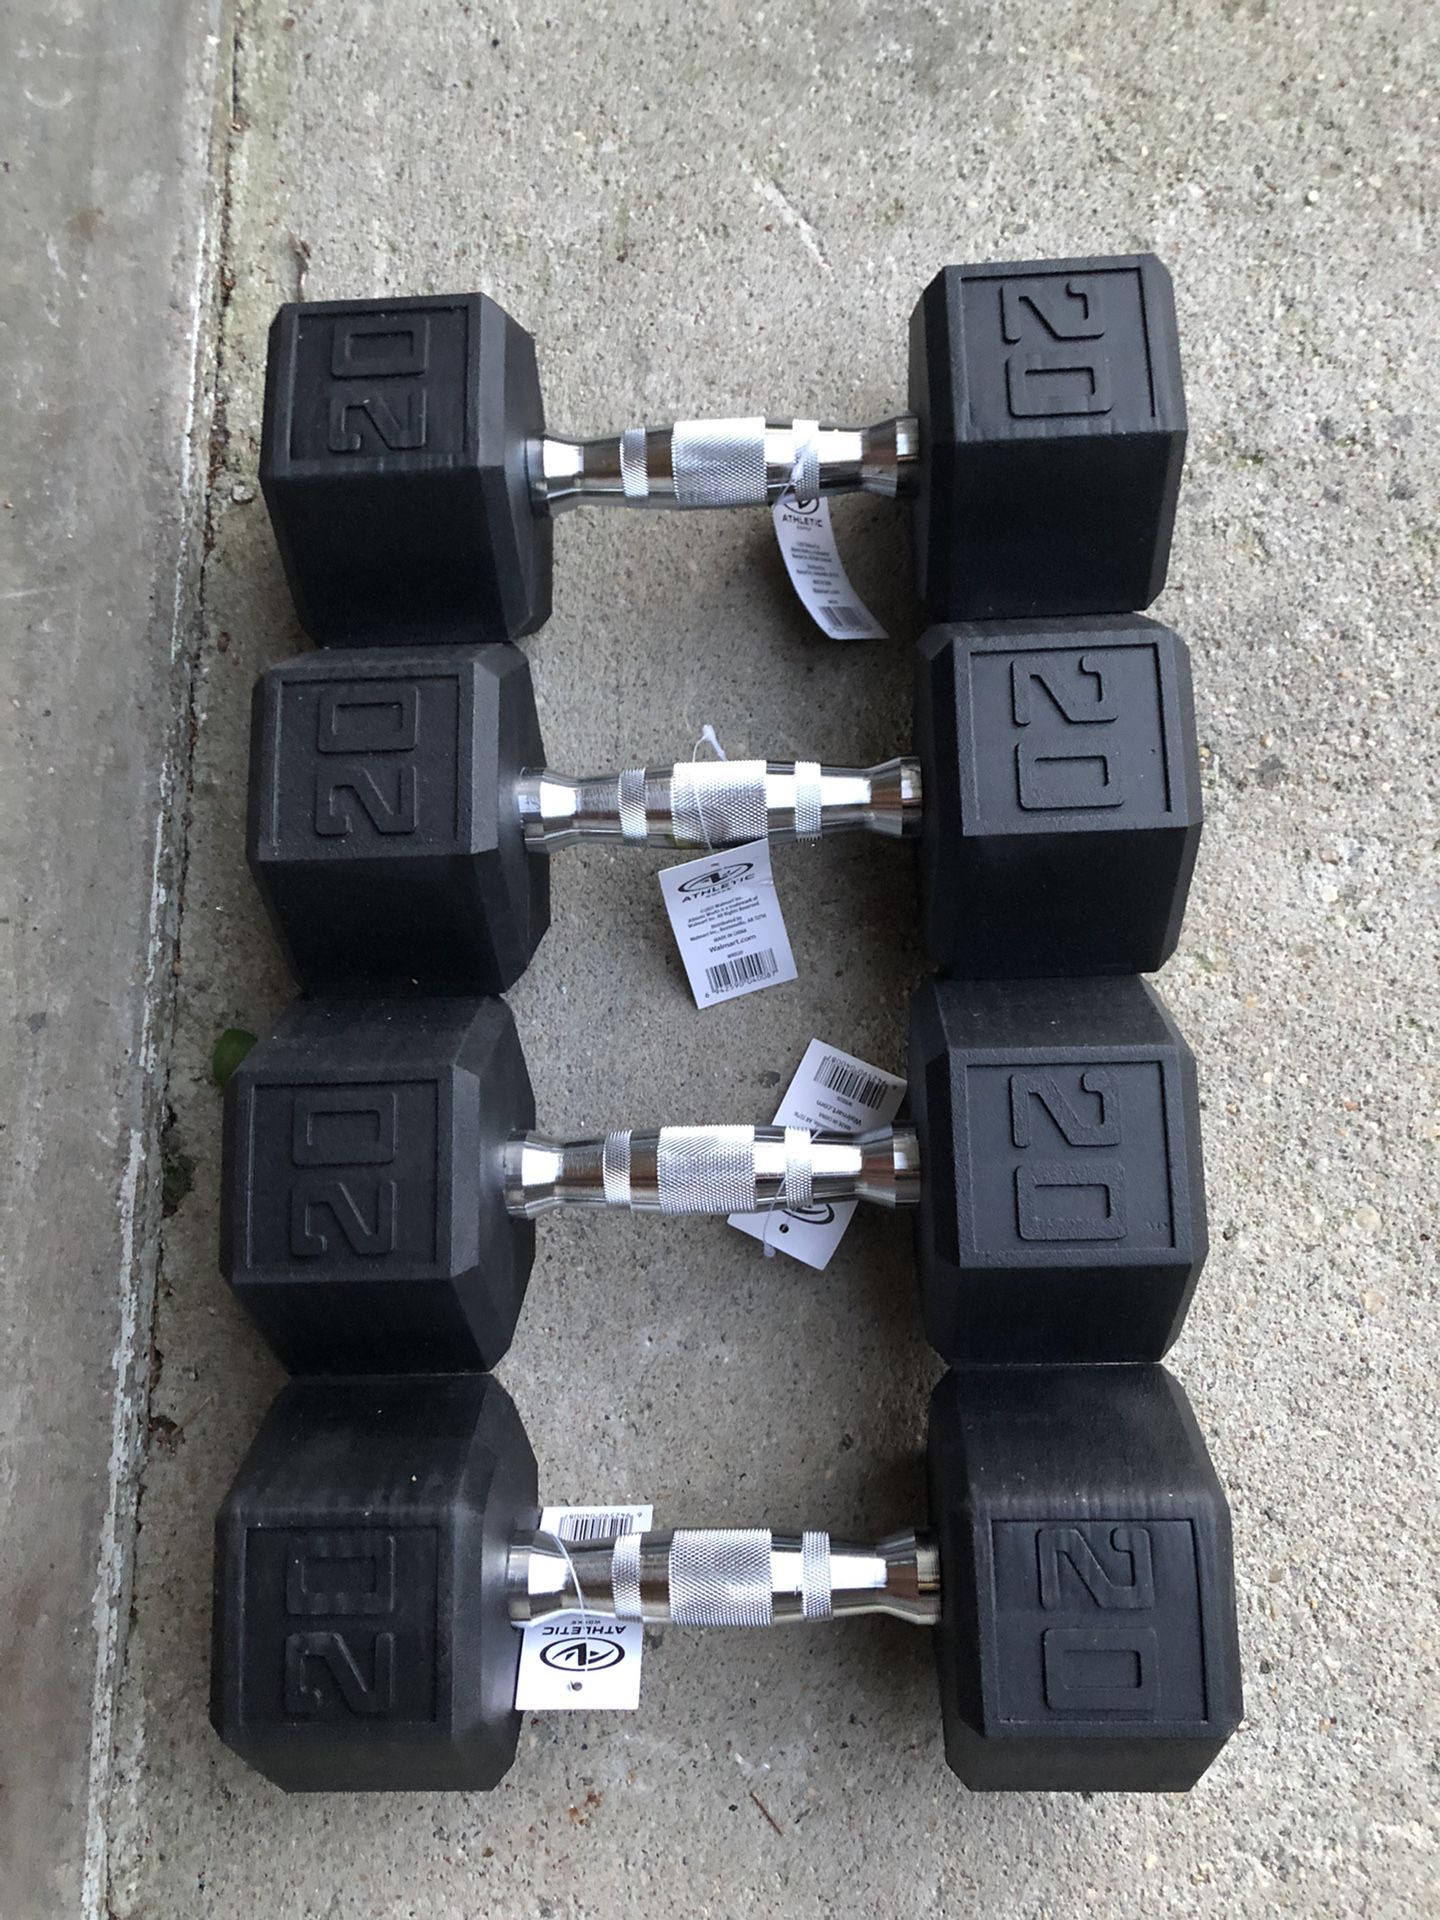 4 New Rubber Coated Dumbbells Total 80 Lbs